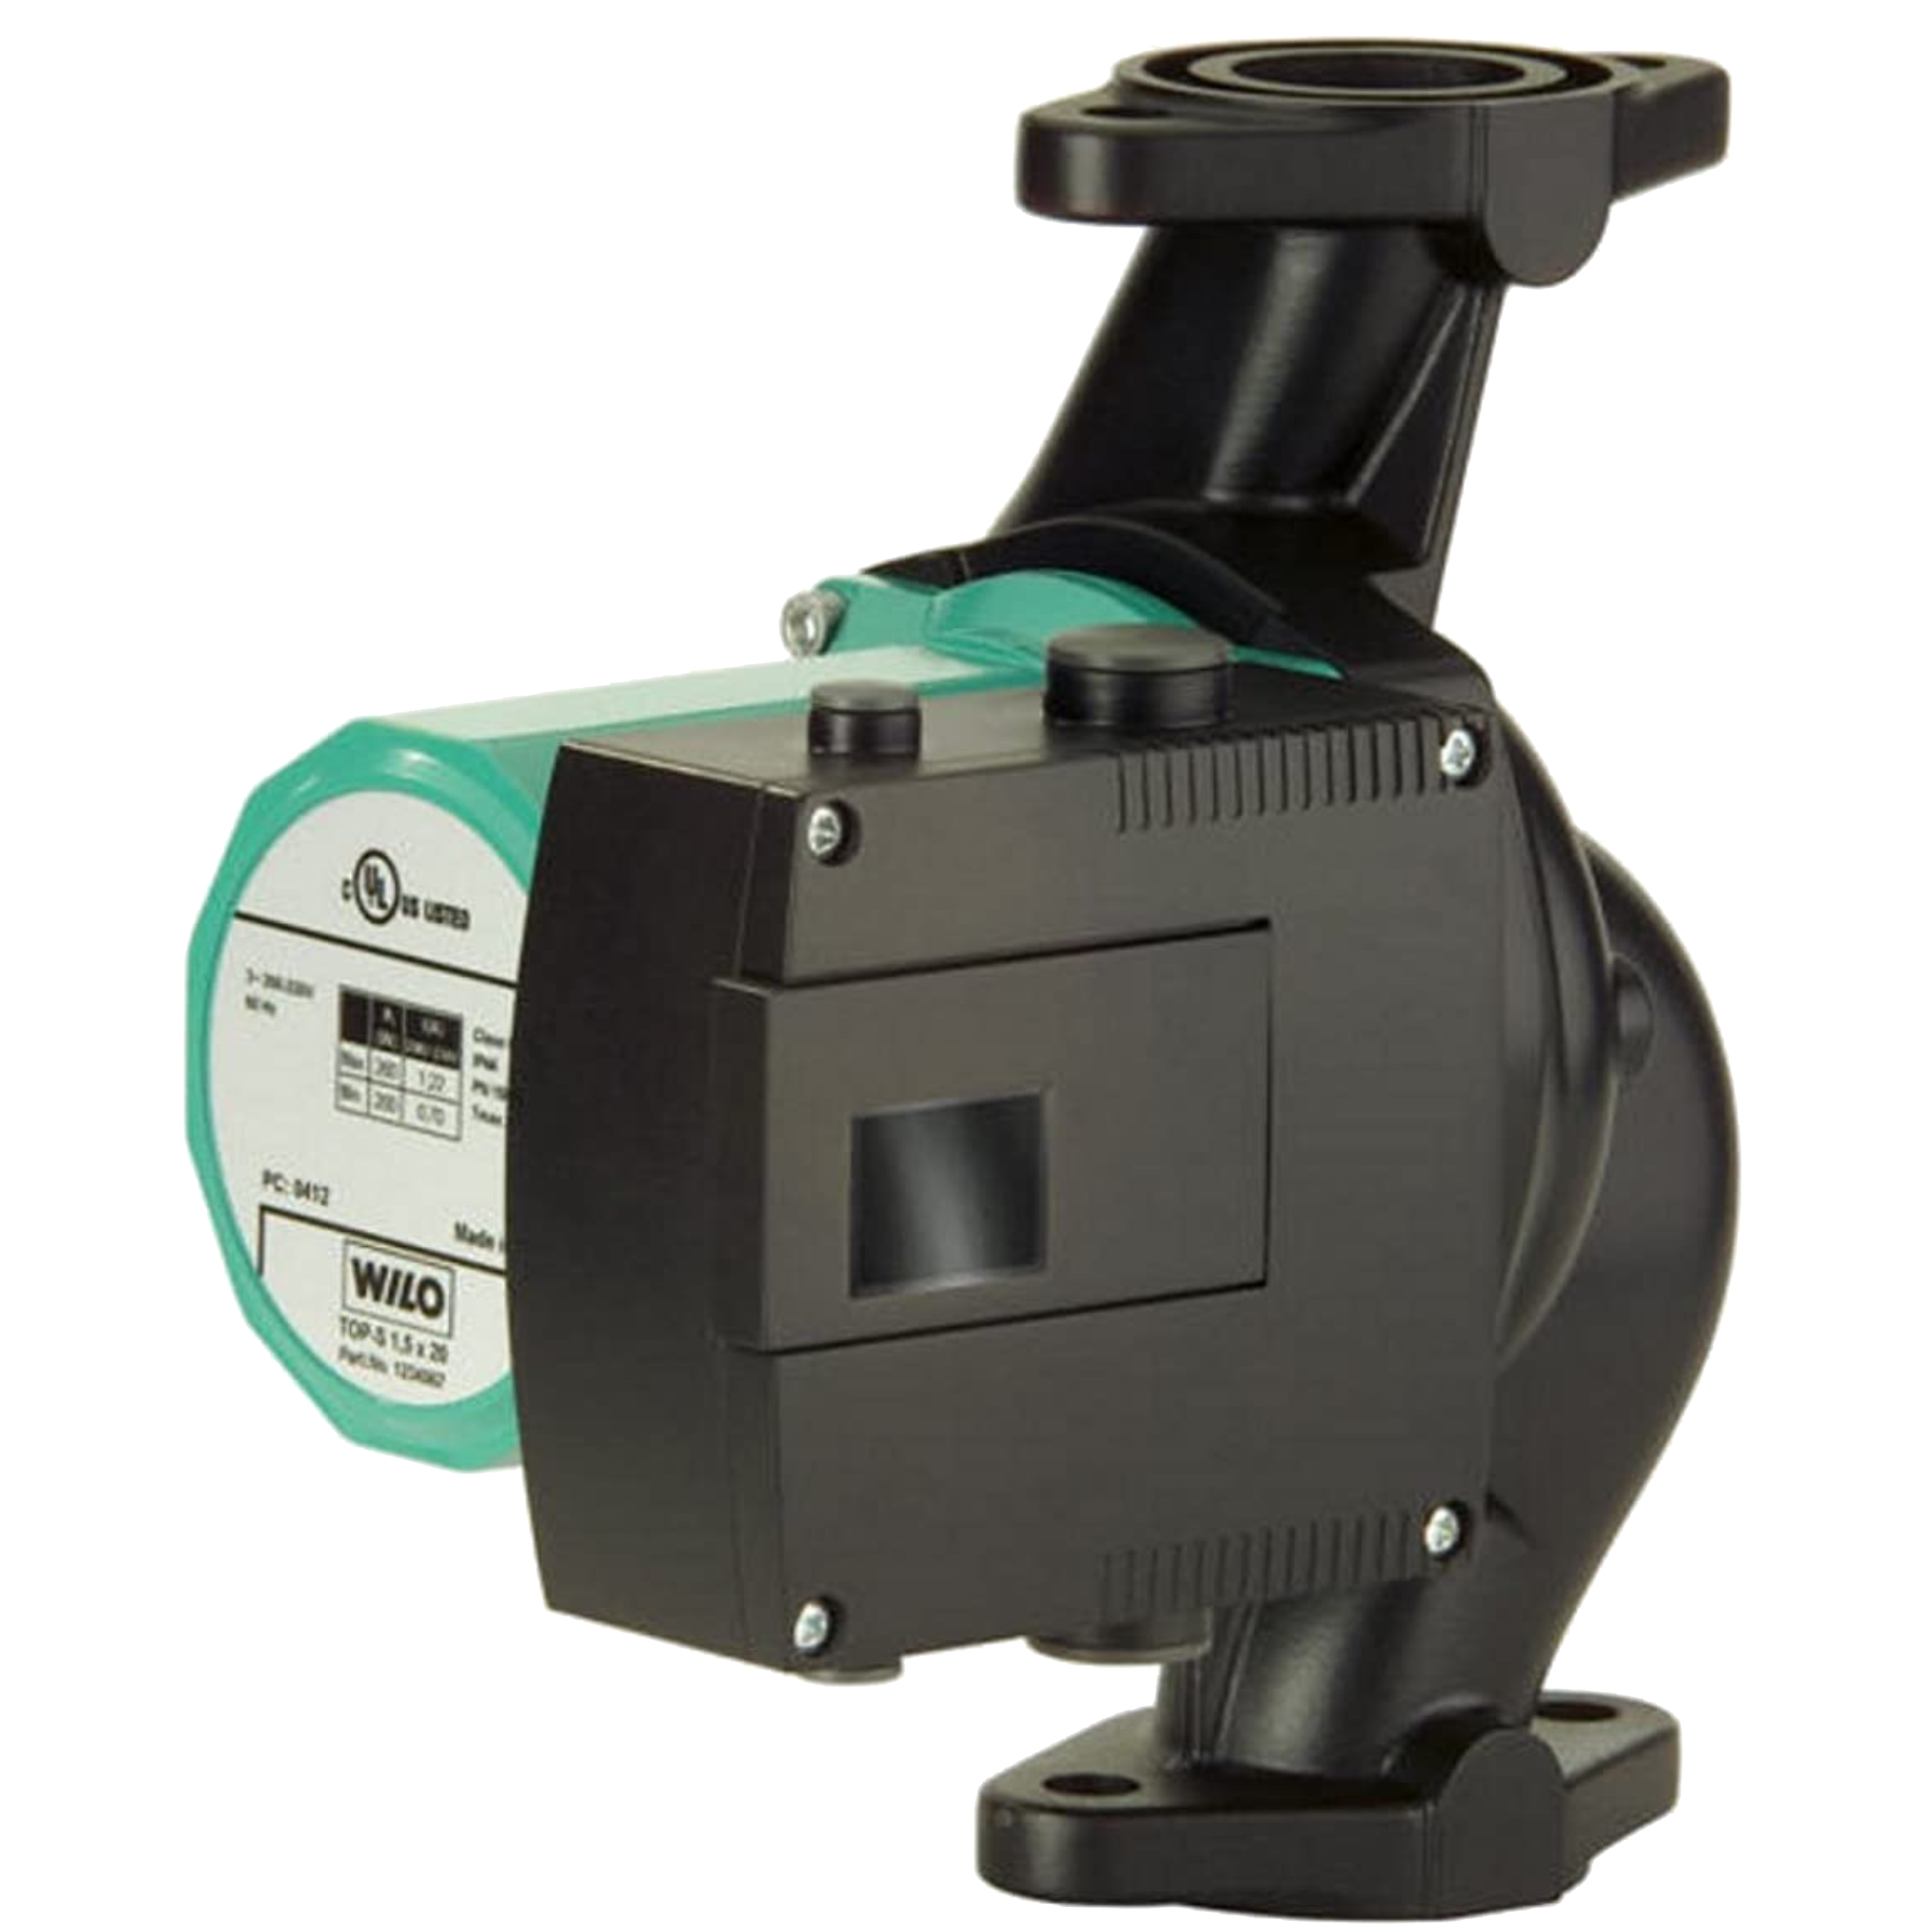 Top S 1.25x25 Wilo Top S Series 2-Speed Residential Circulating Pump, 1/8 HP, 145 PSI, Max Flow 35 USGPM, 115V/60Hz/1Ph